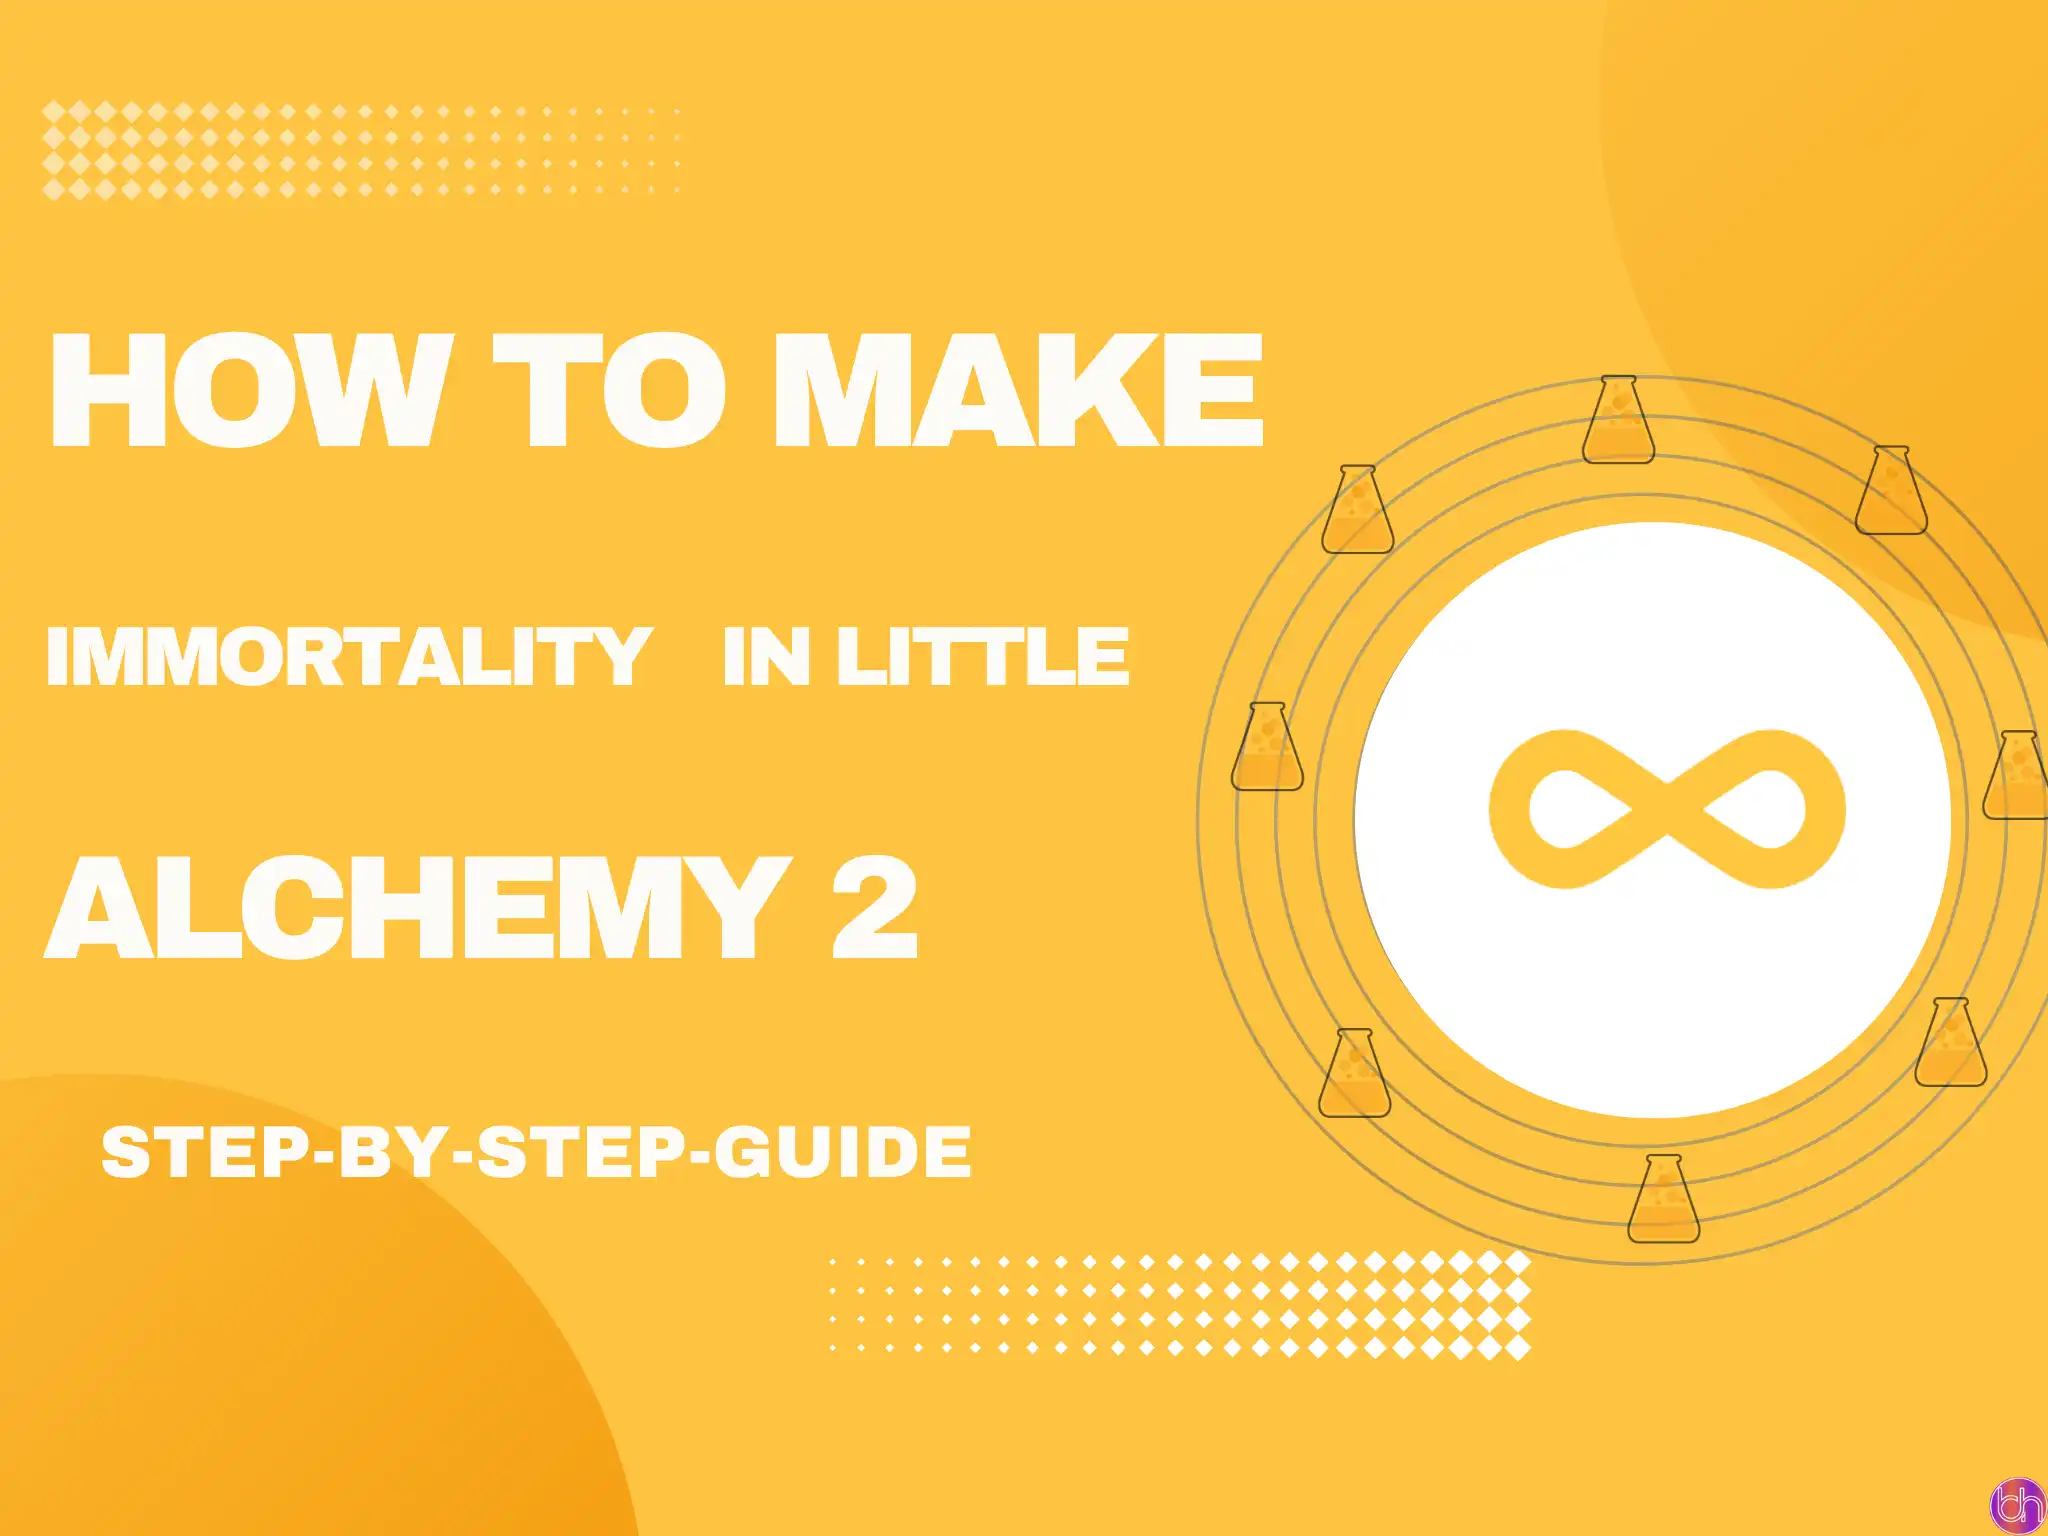 How to make immortality in little alchemy 2